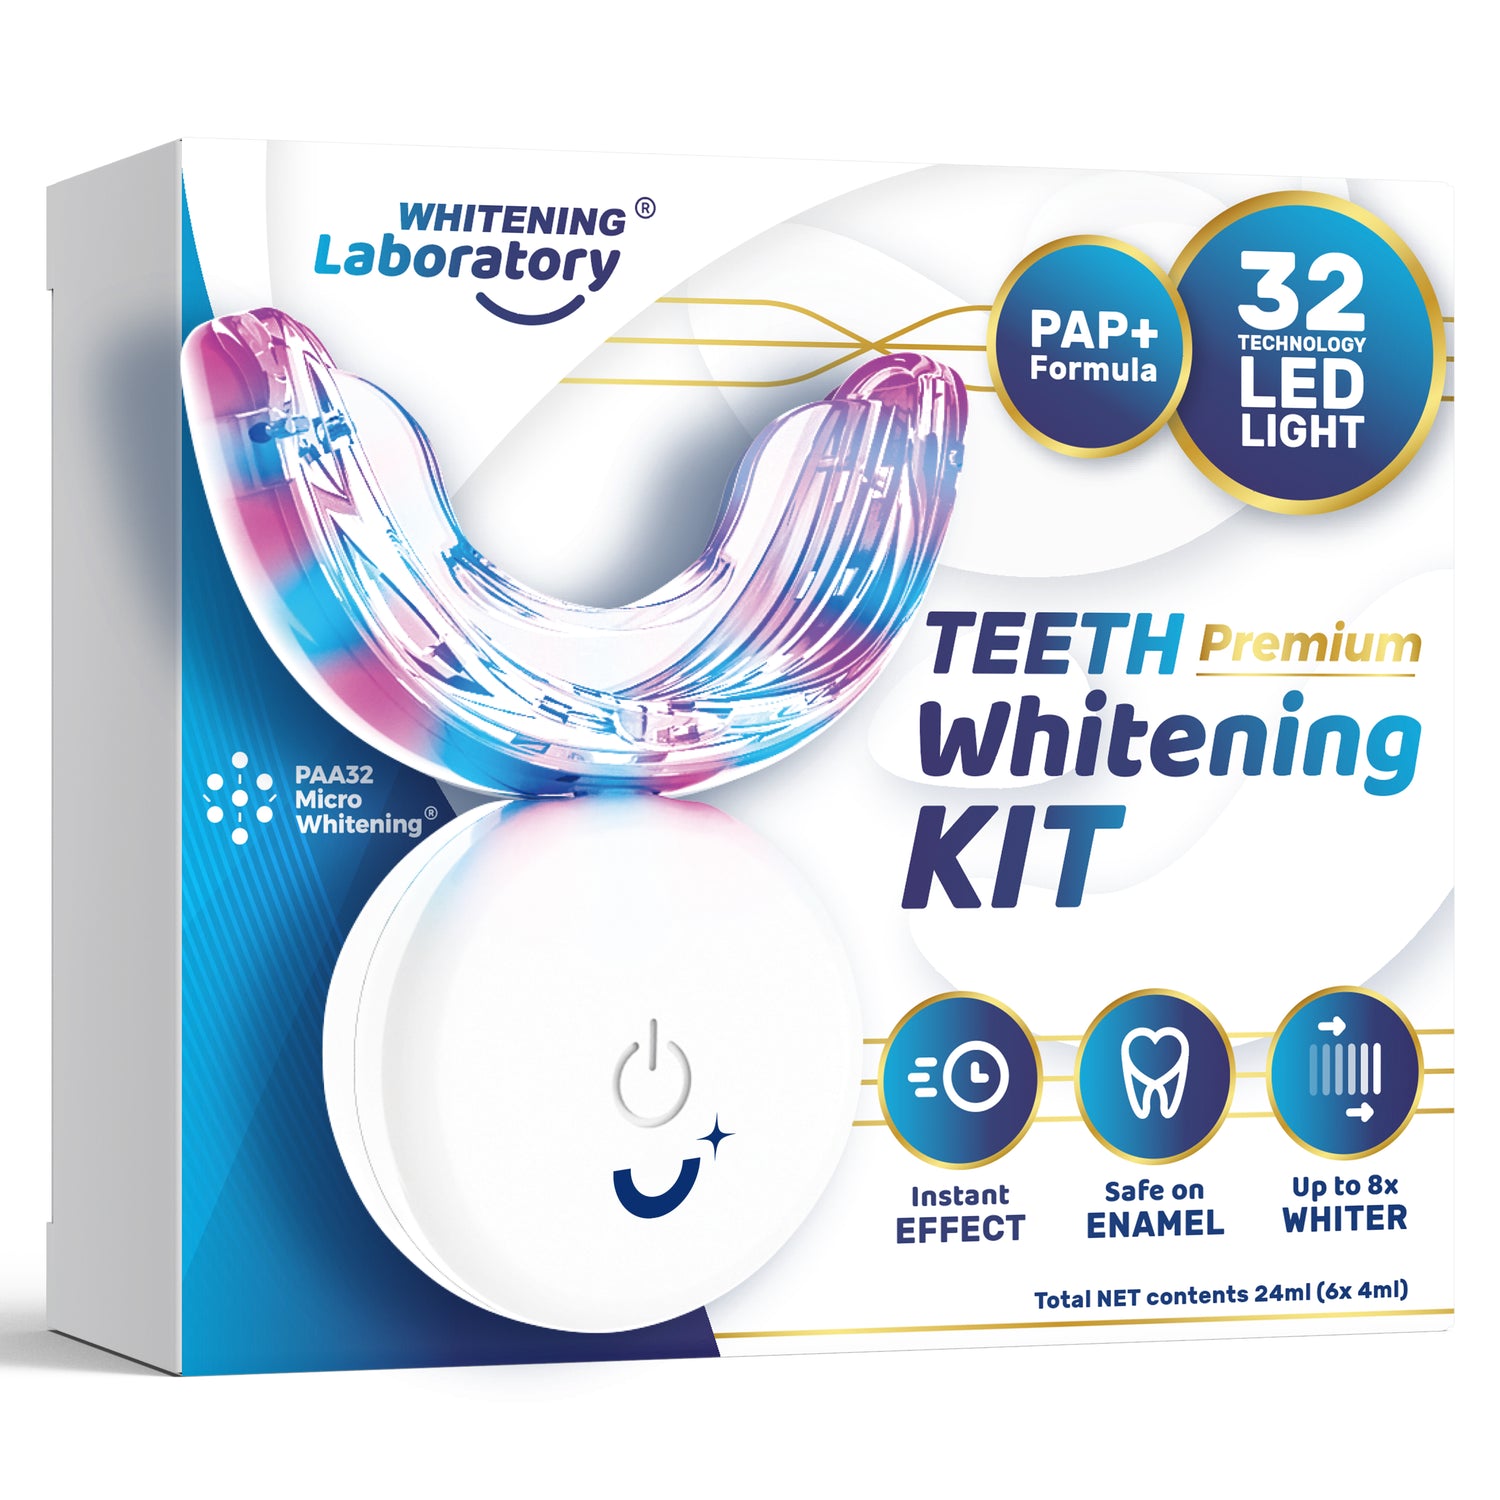 Complete LED Teeth Whitening Kit with Whitening Gel Tubes from Whitening Laboratory for at-home treatment.